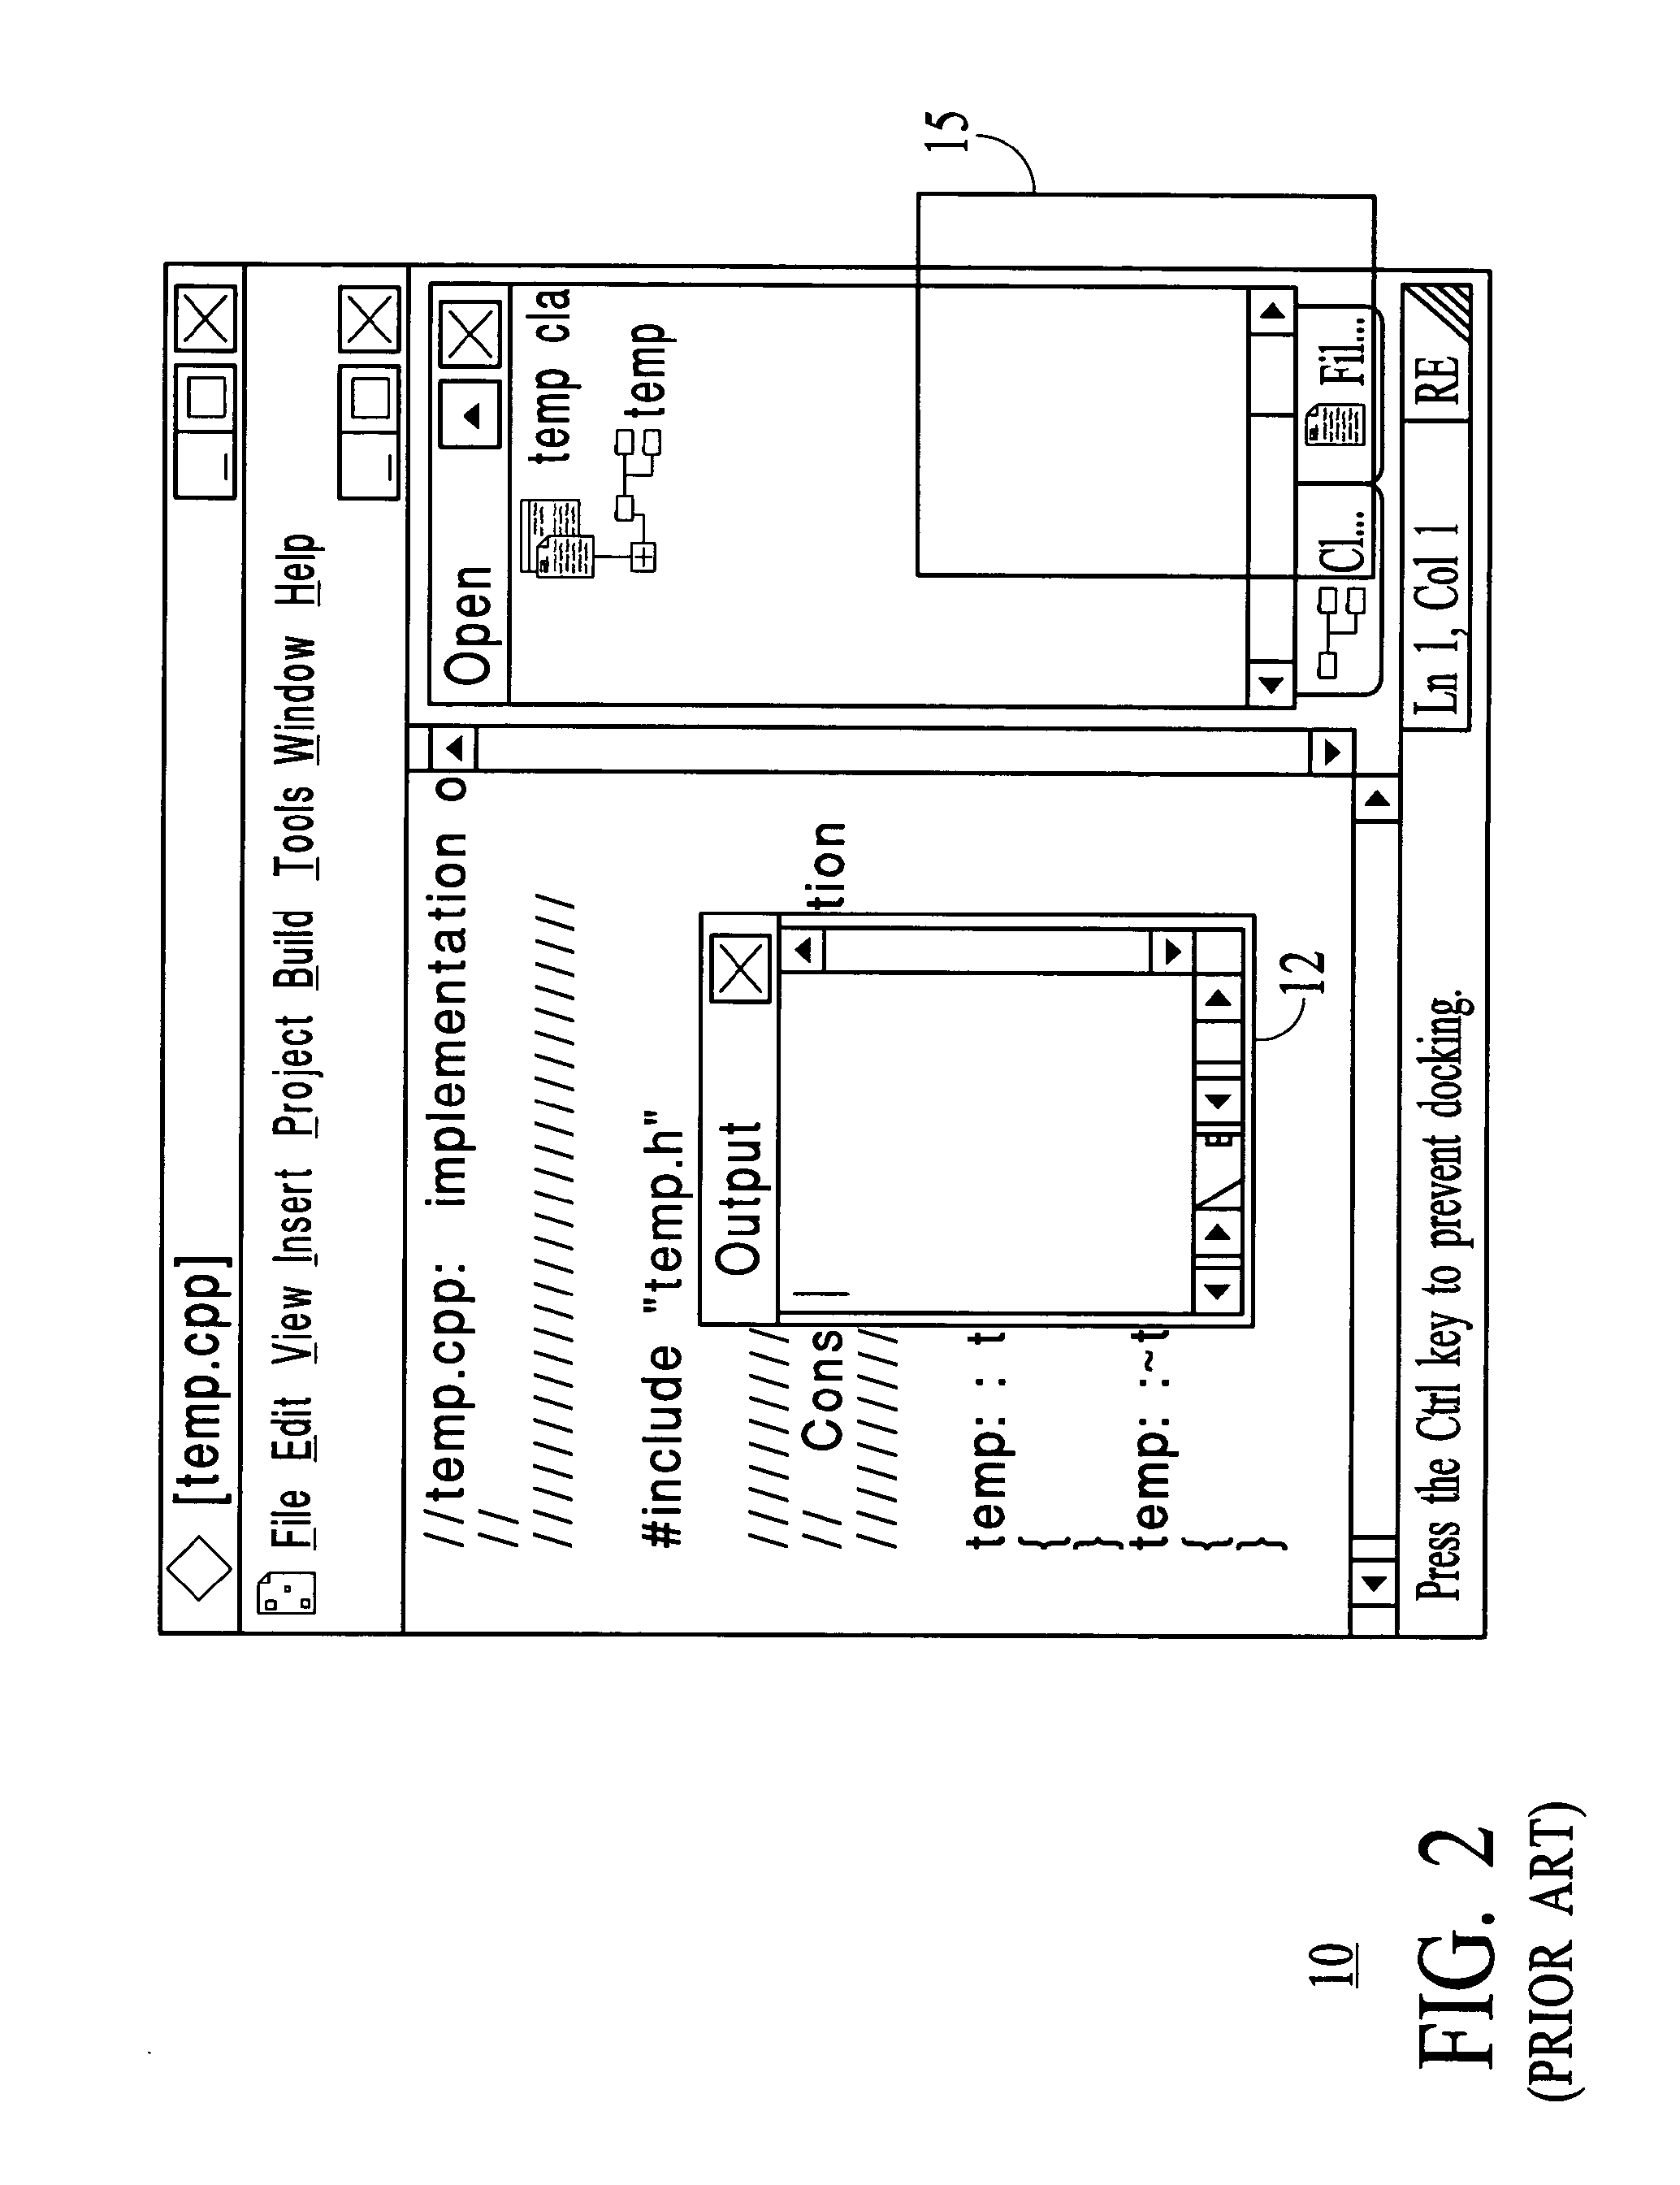 Method and system for providing feedback for docking a content pane in a host window